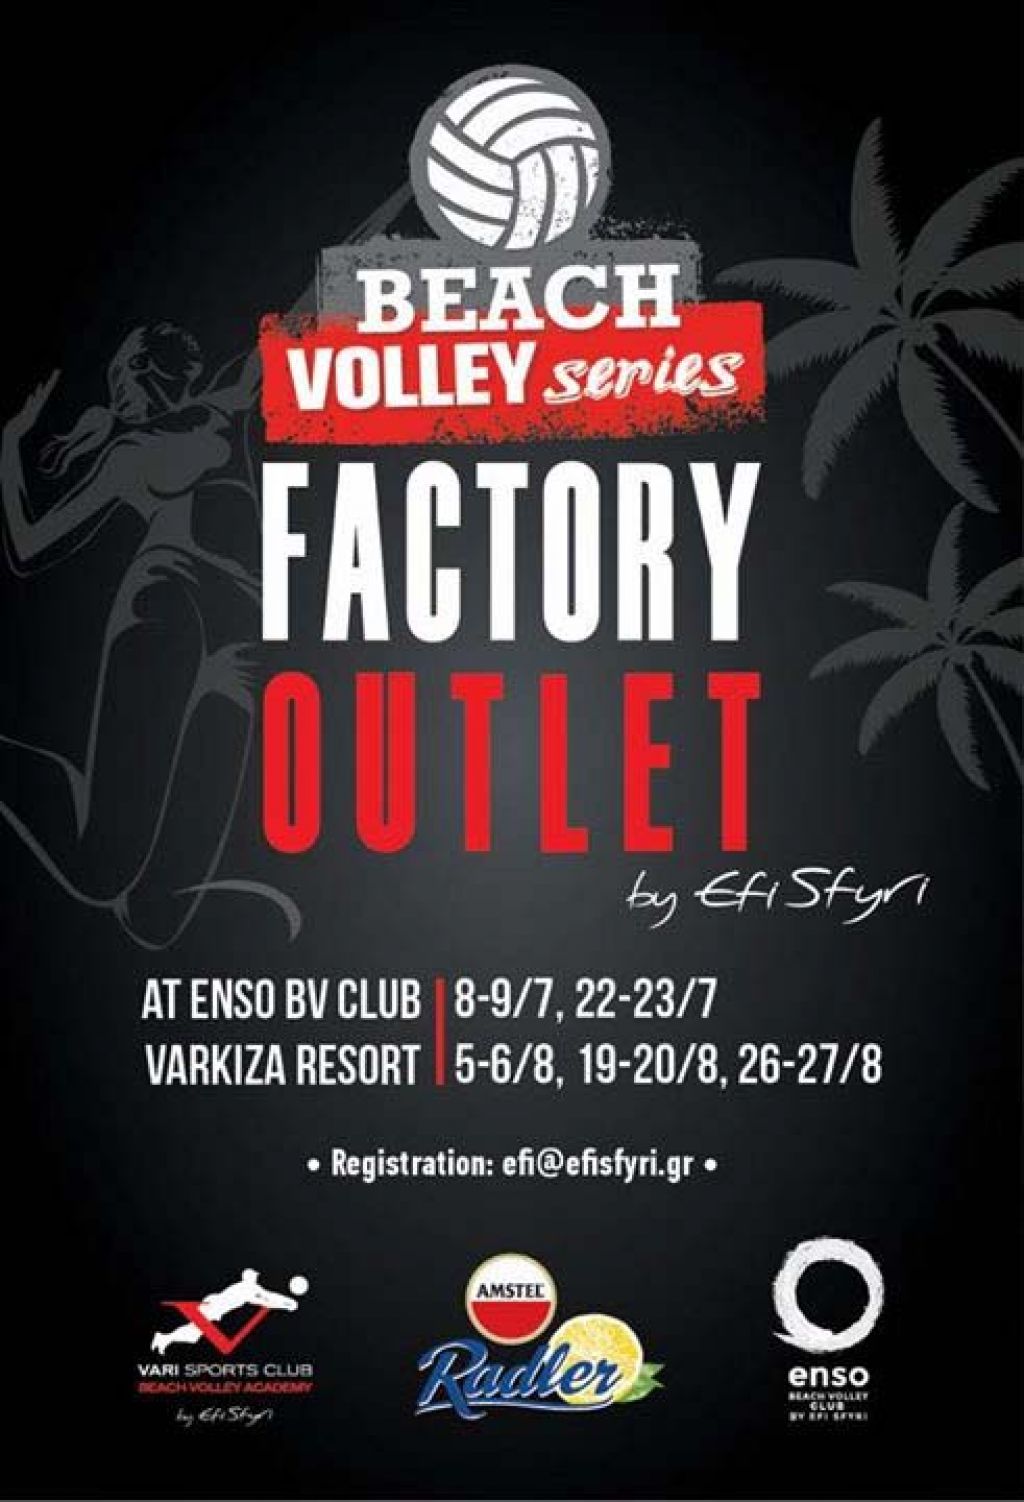 FACTORY OUTLET BEACH VOLLEY SERIES!!